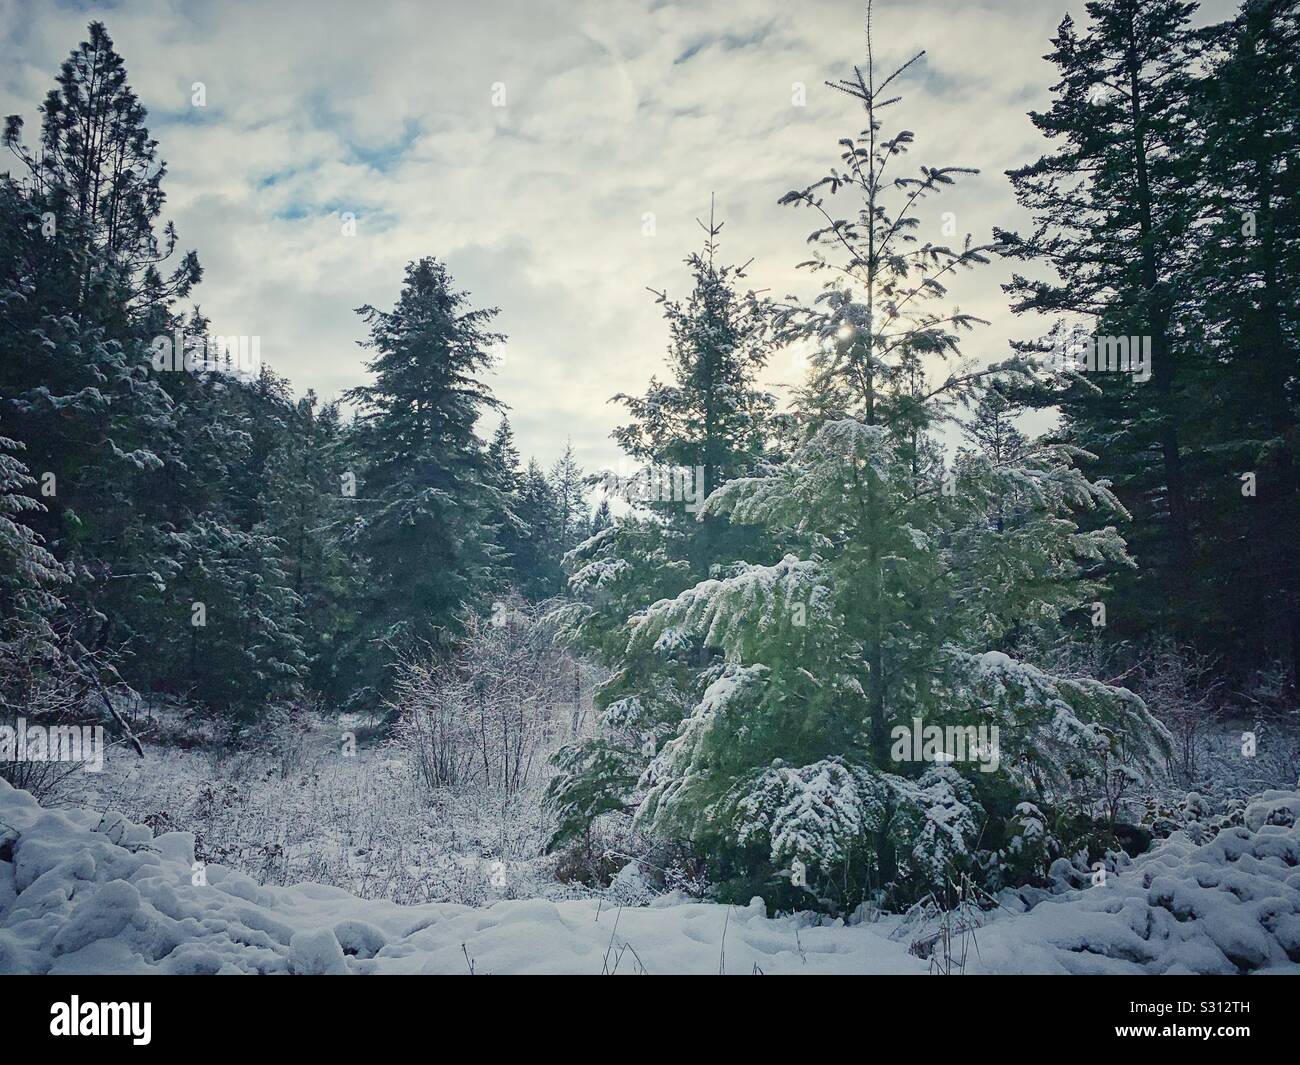 Snowy winter landscape with fresh snow covered evergreen trees. Stock Photo